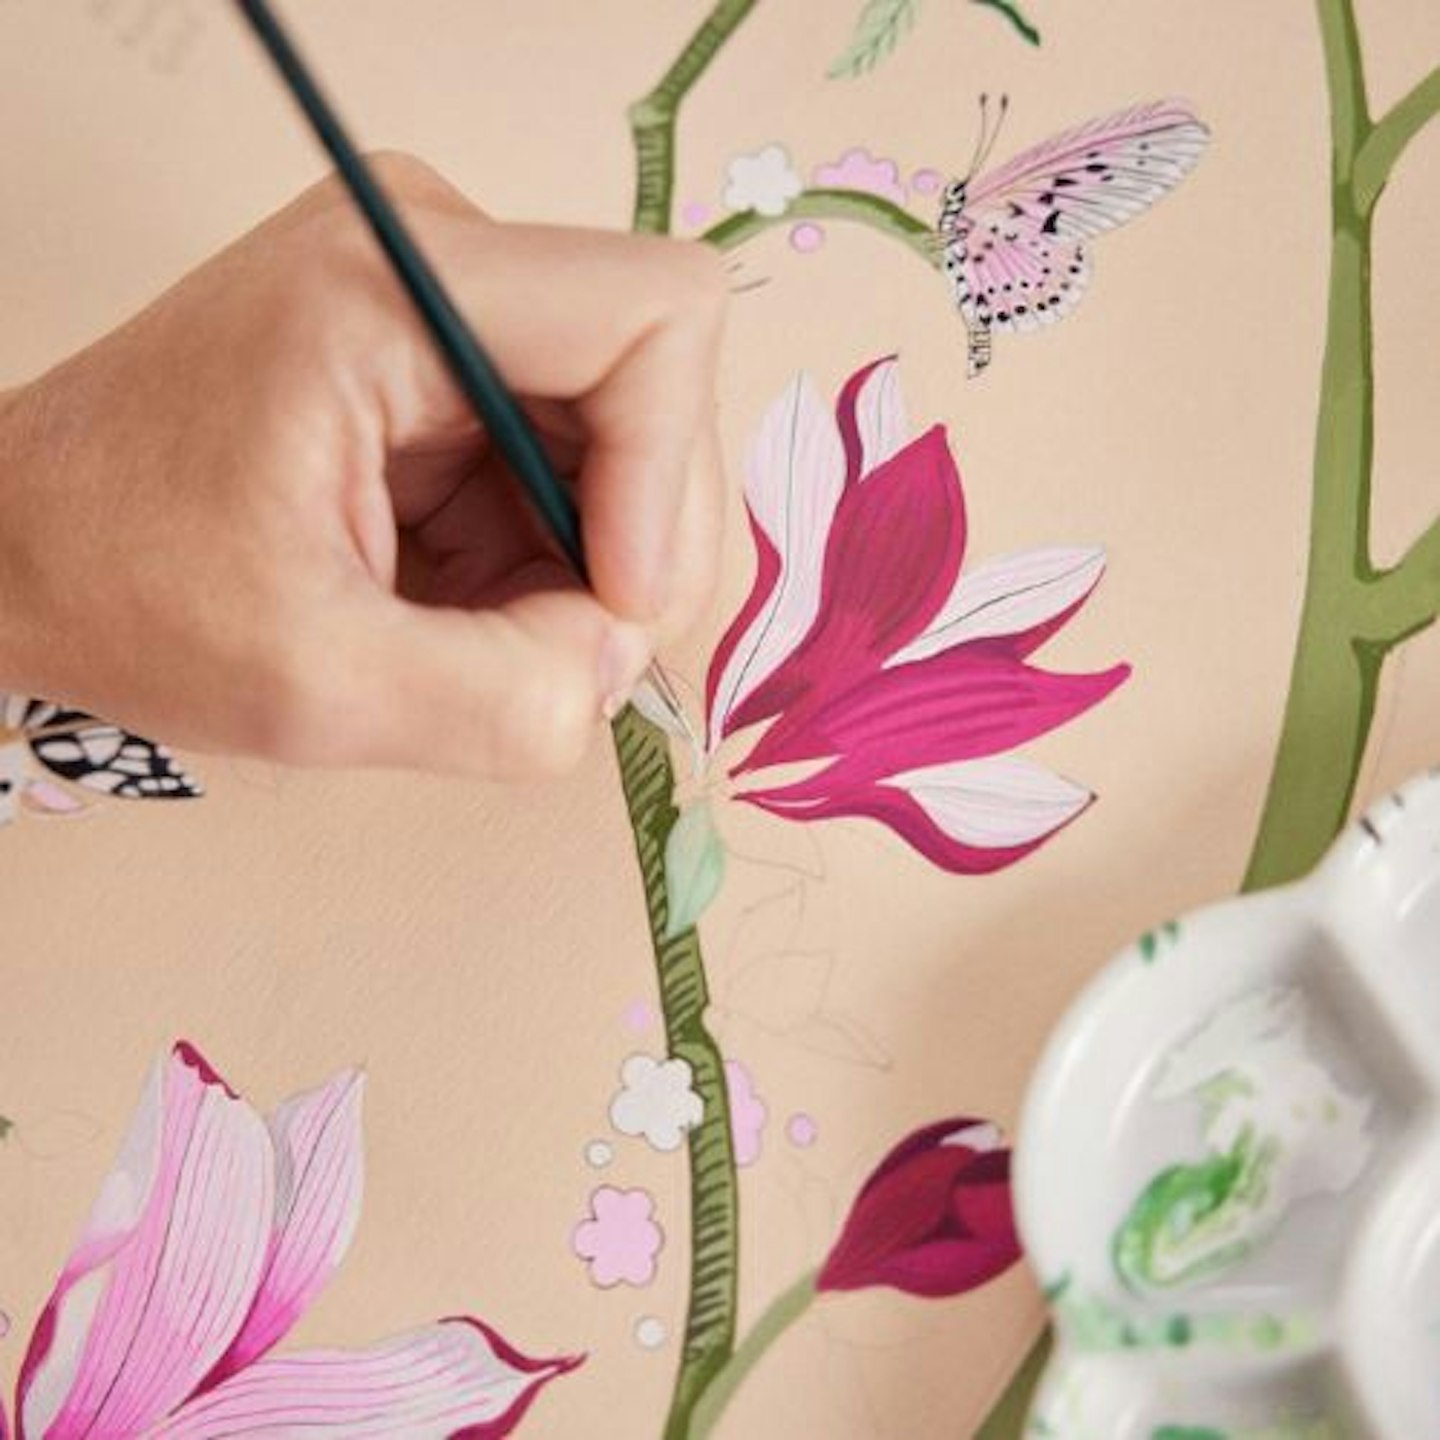 By Holly Marler, Cath Kidston's Creative Director